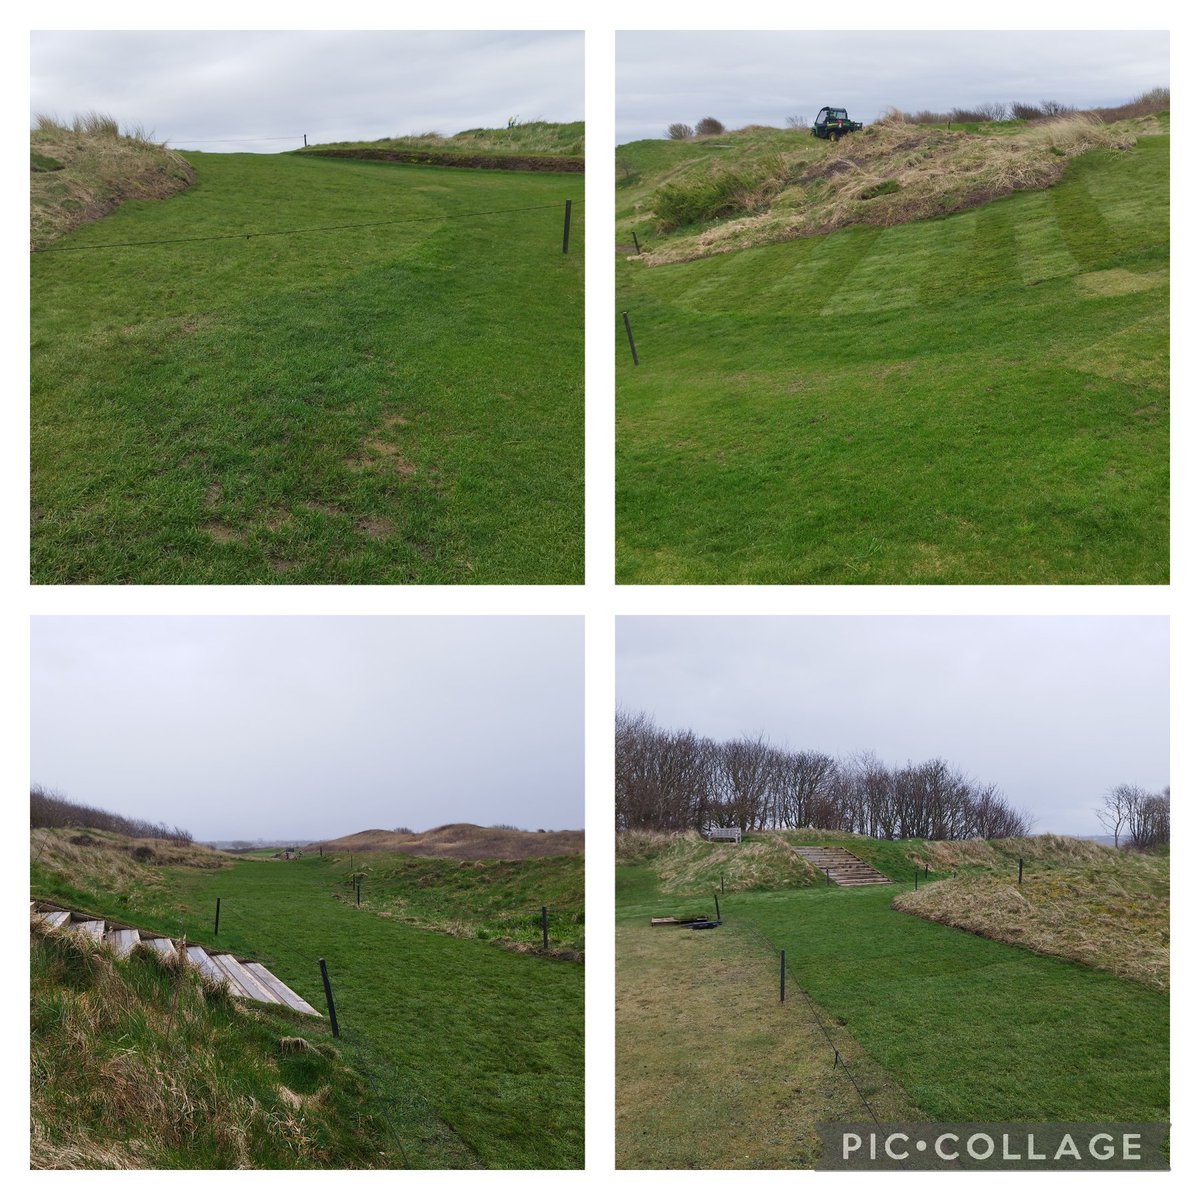 Lots done @WestLancsGC the last couple of weeks. Finished concreting the yard, drainage improvements, screening sand and rootzone ready for the season and some tidying up done. @westlancsgreens putting down plenty of turf on the new paths 👌 Thankyou as always!